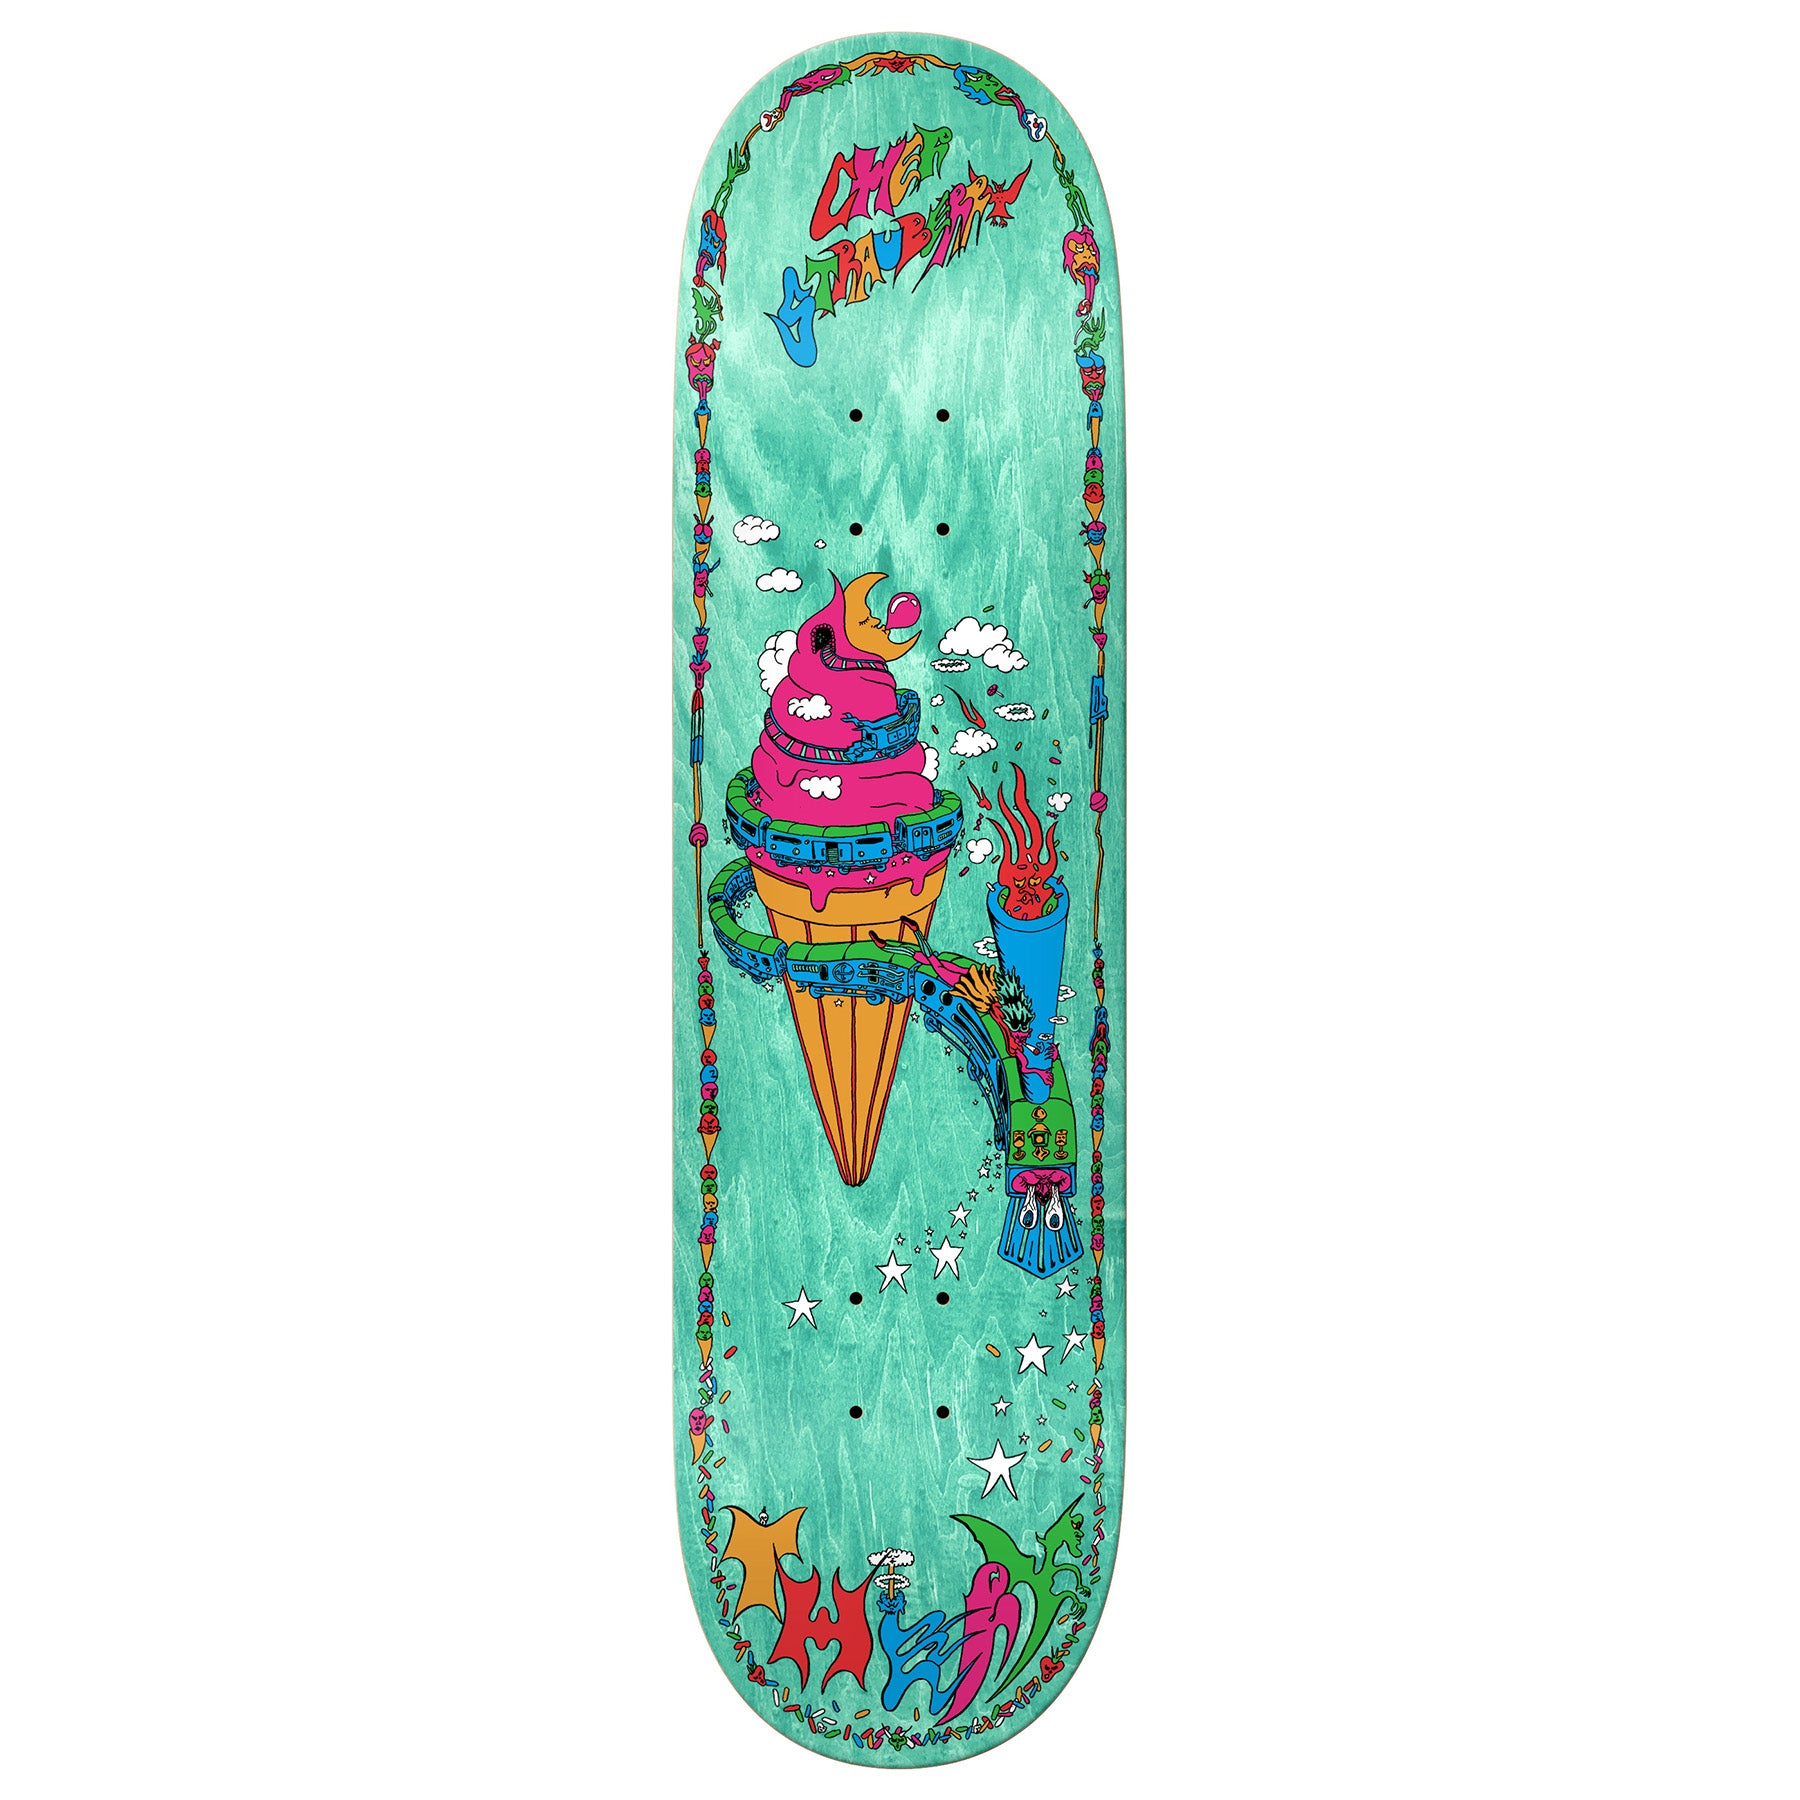 There x Sam Ryser Cher Strauberry Deck - 8.25 True Fit